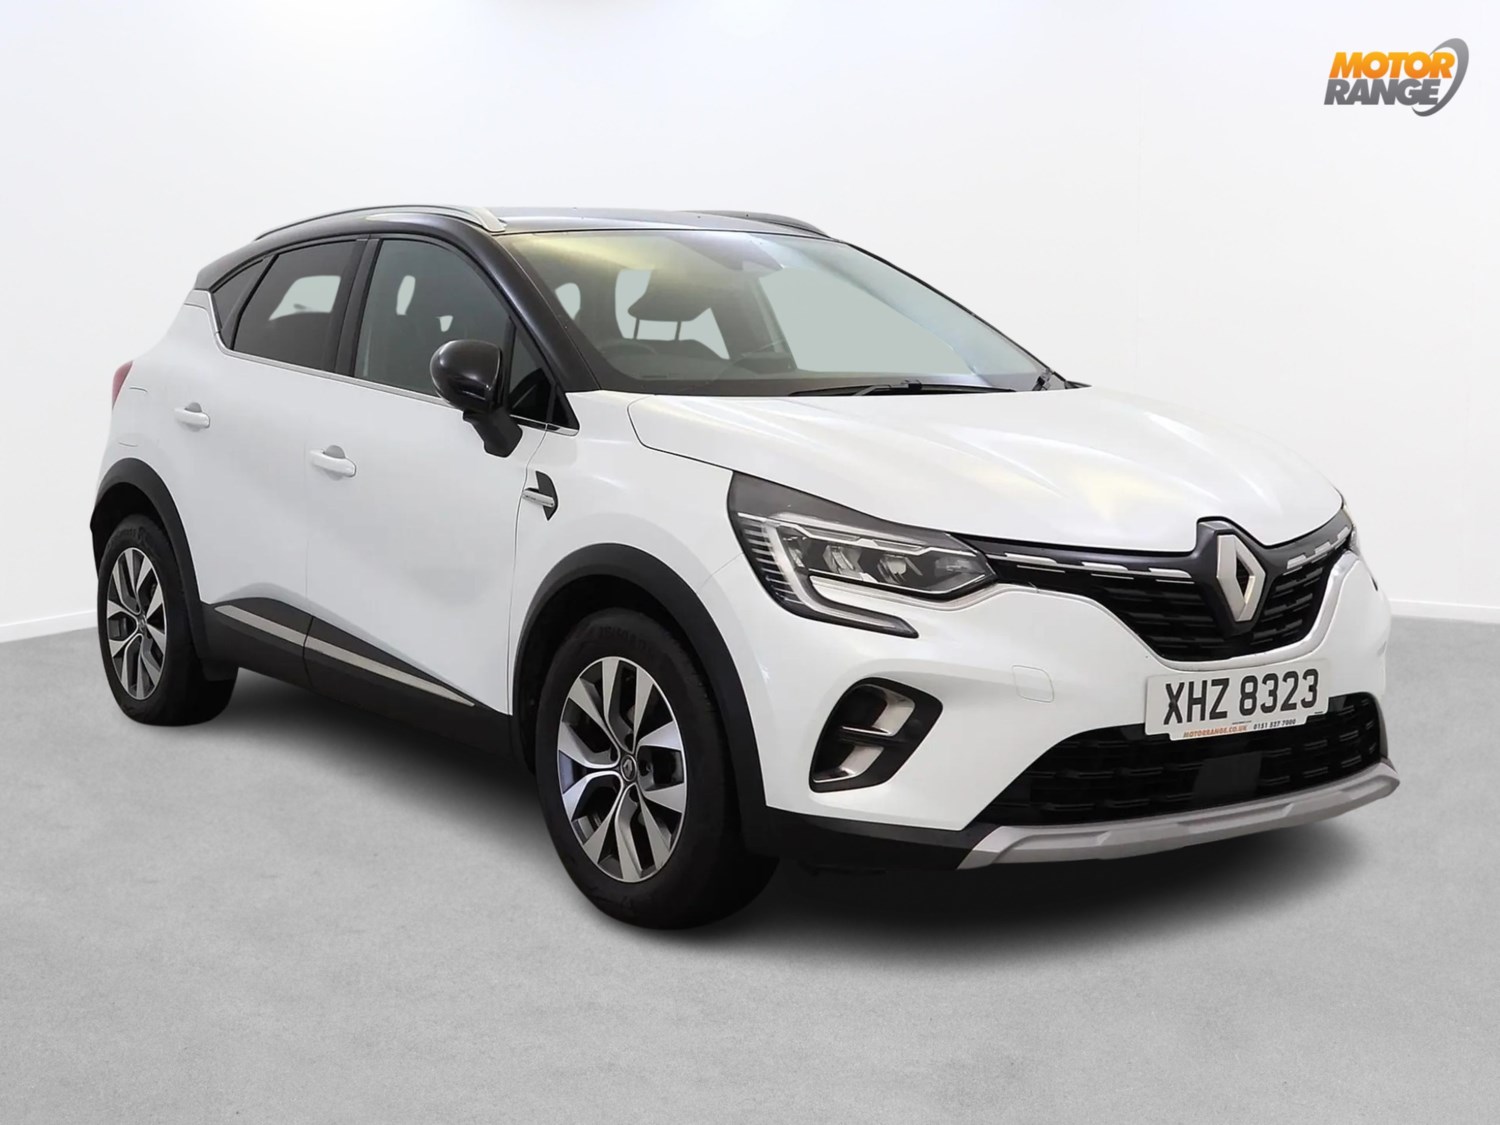 2020 used Renault Captur 1.3 TCE 130 S Edition 5dr EDC [Bose]